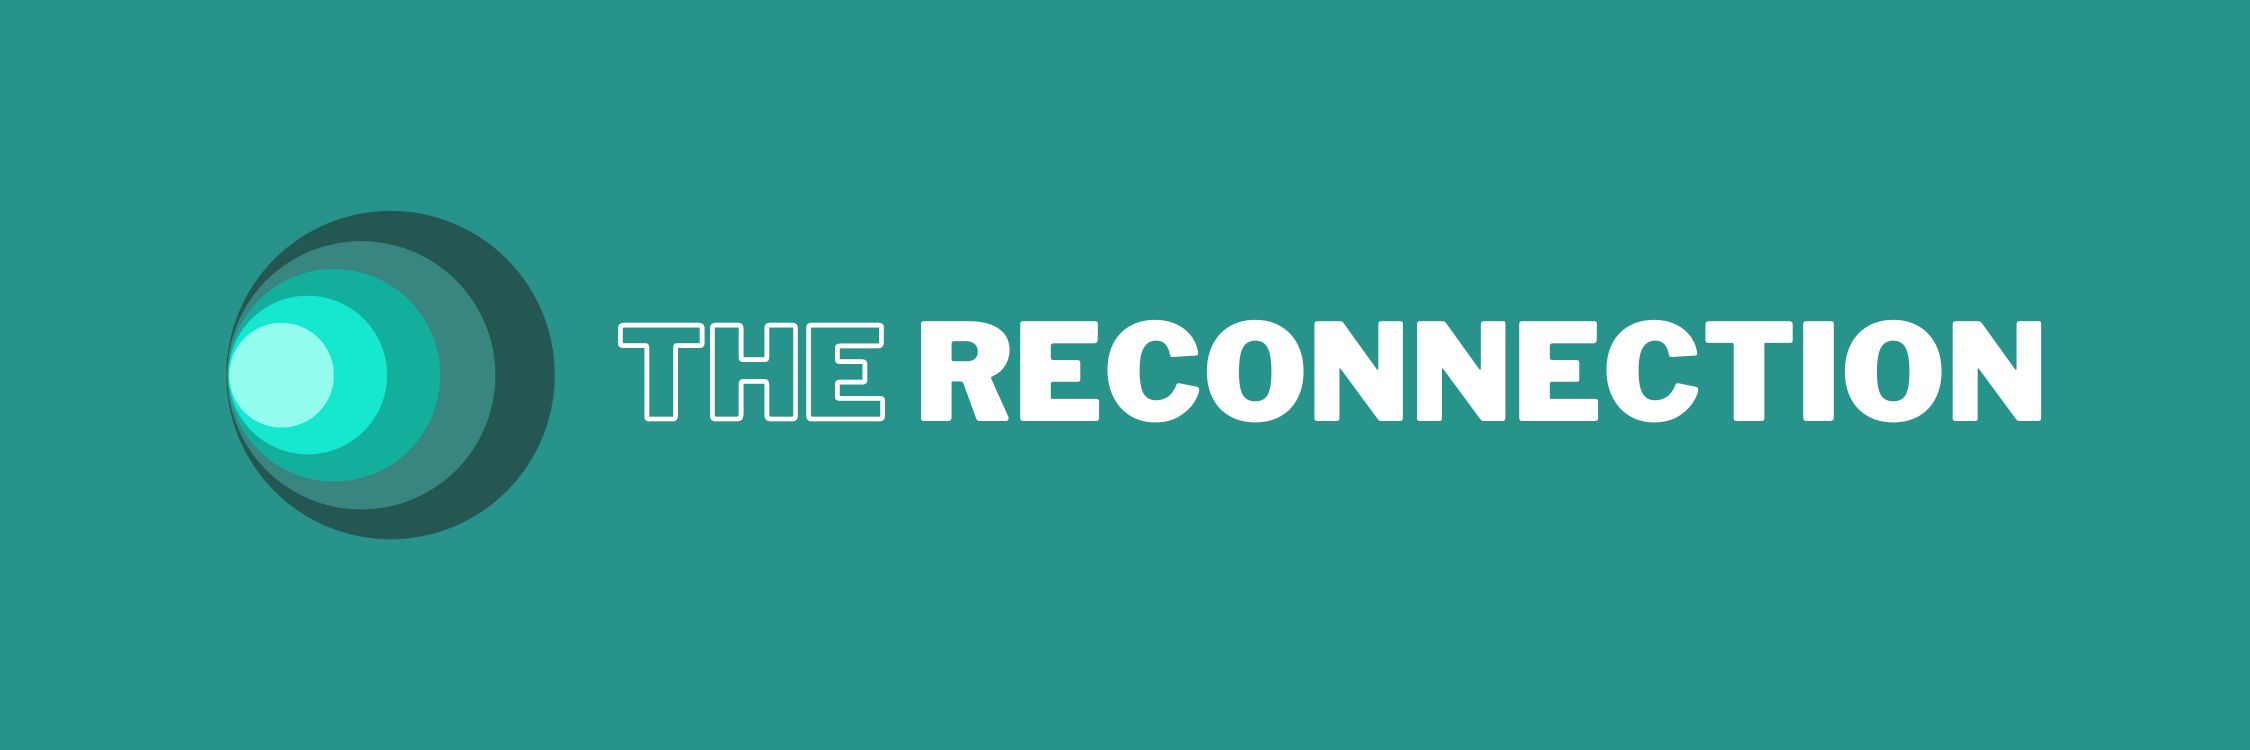 The Reconnection banner 1